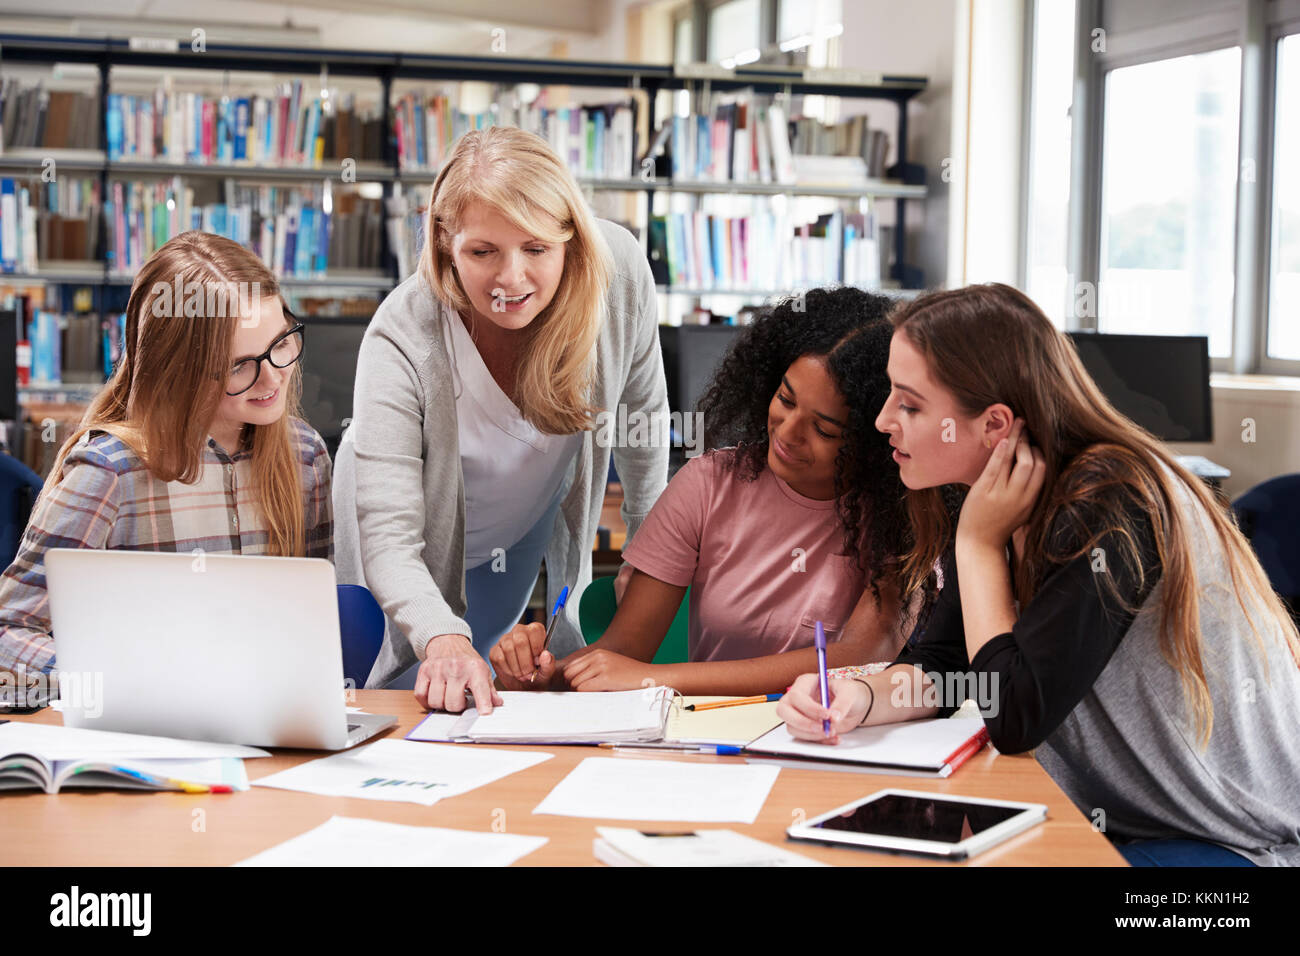 Woman Teacher Working With Female College Students In Library Stock Photo